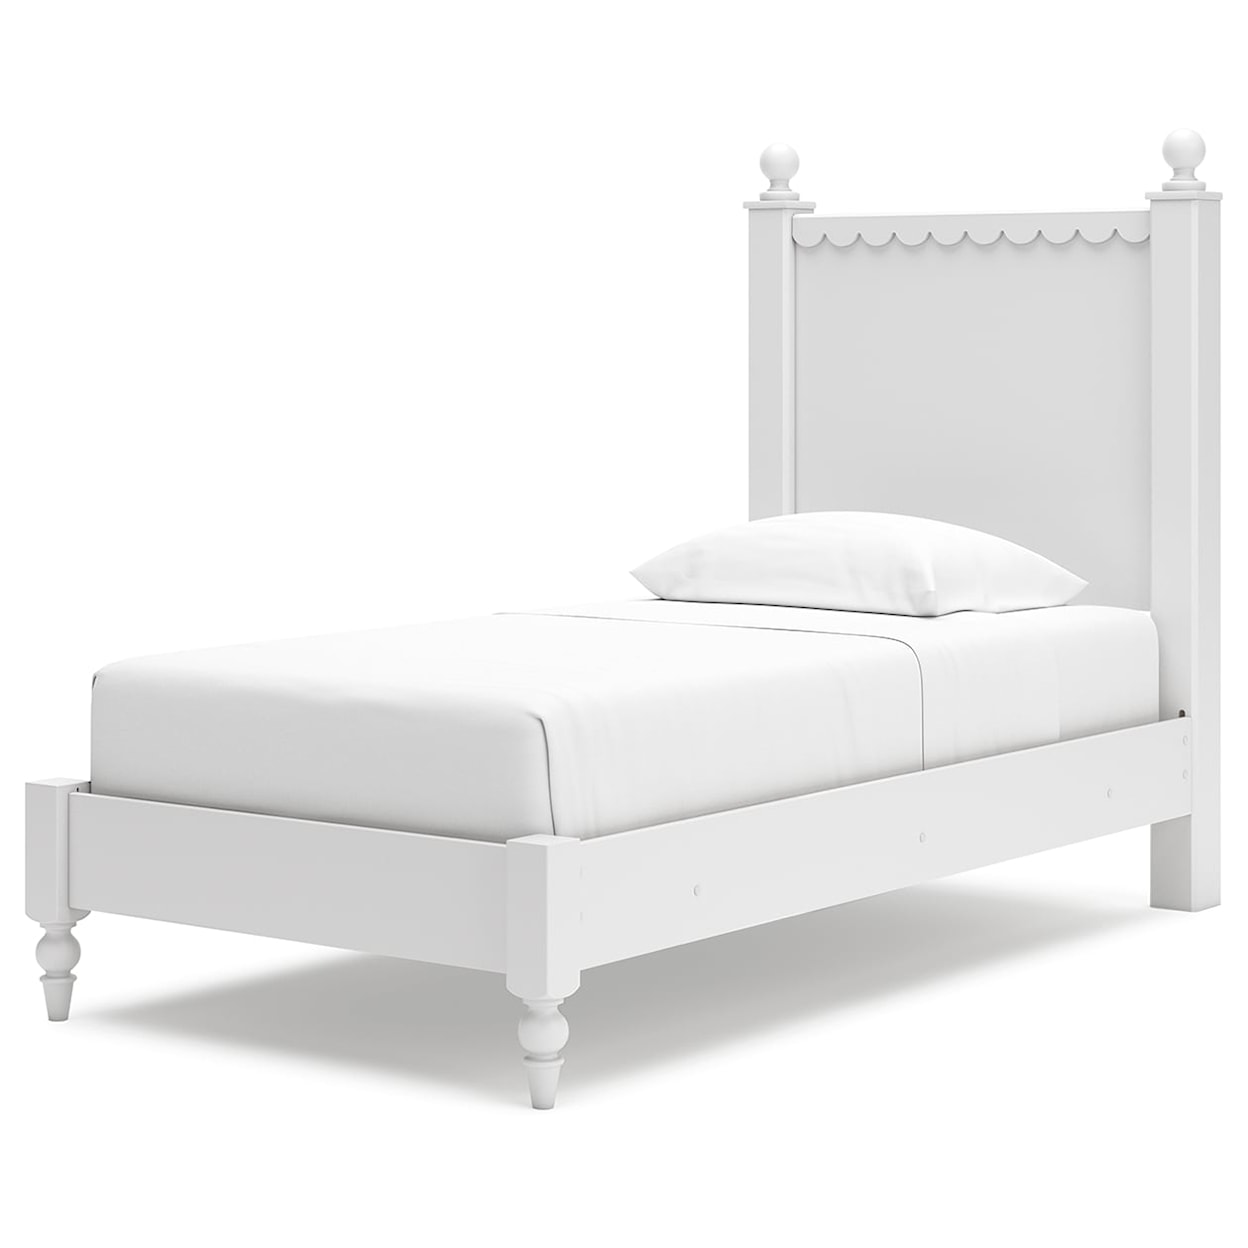 Signature Design by Ashley Mollviney Twin Panel Bed